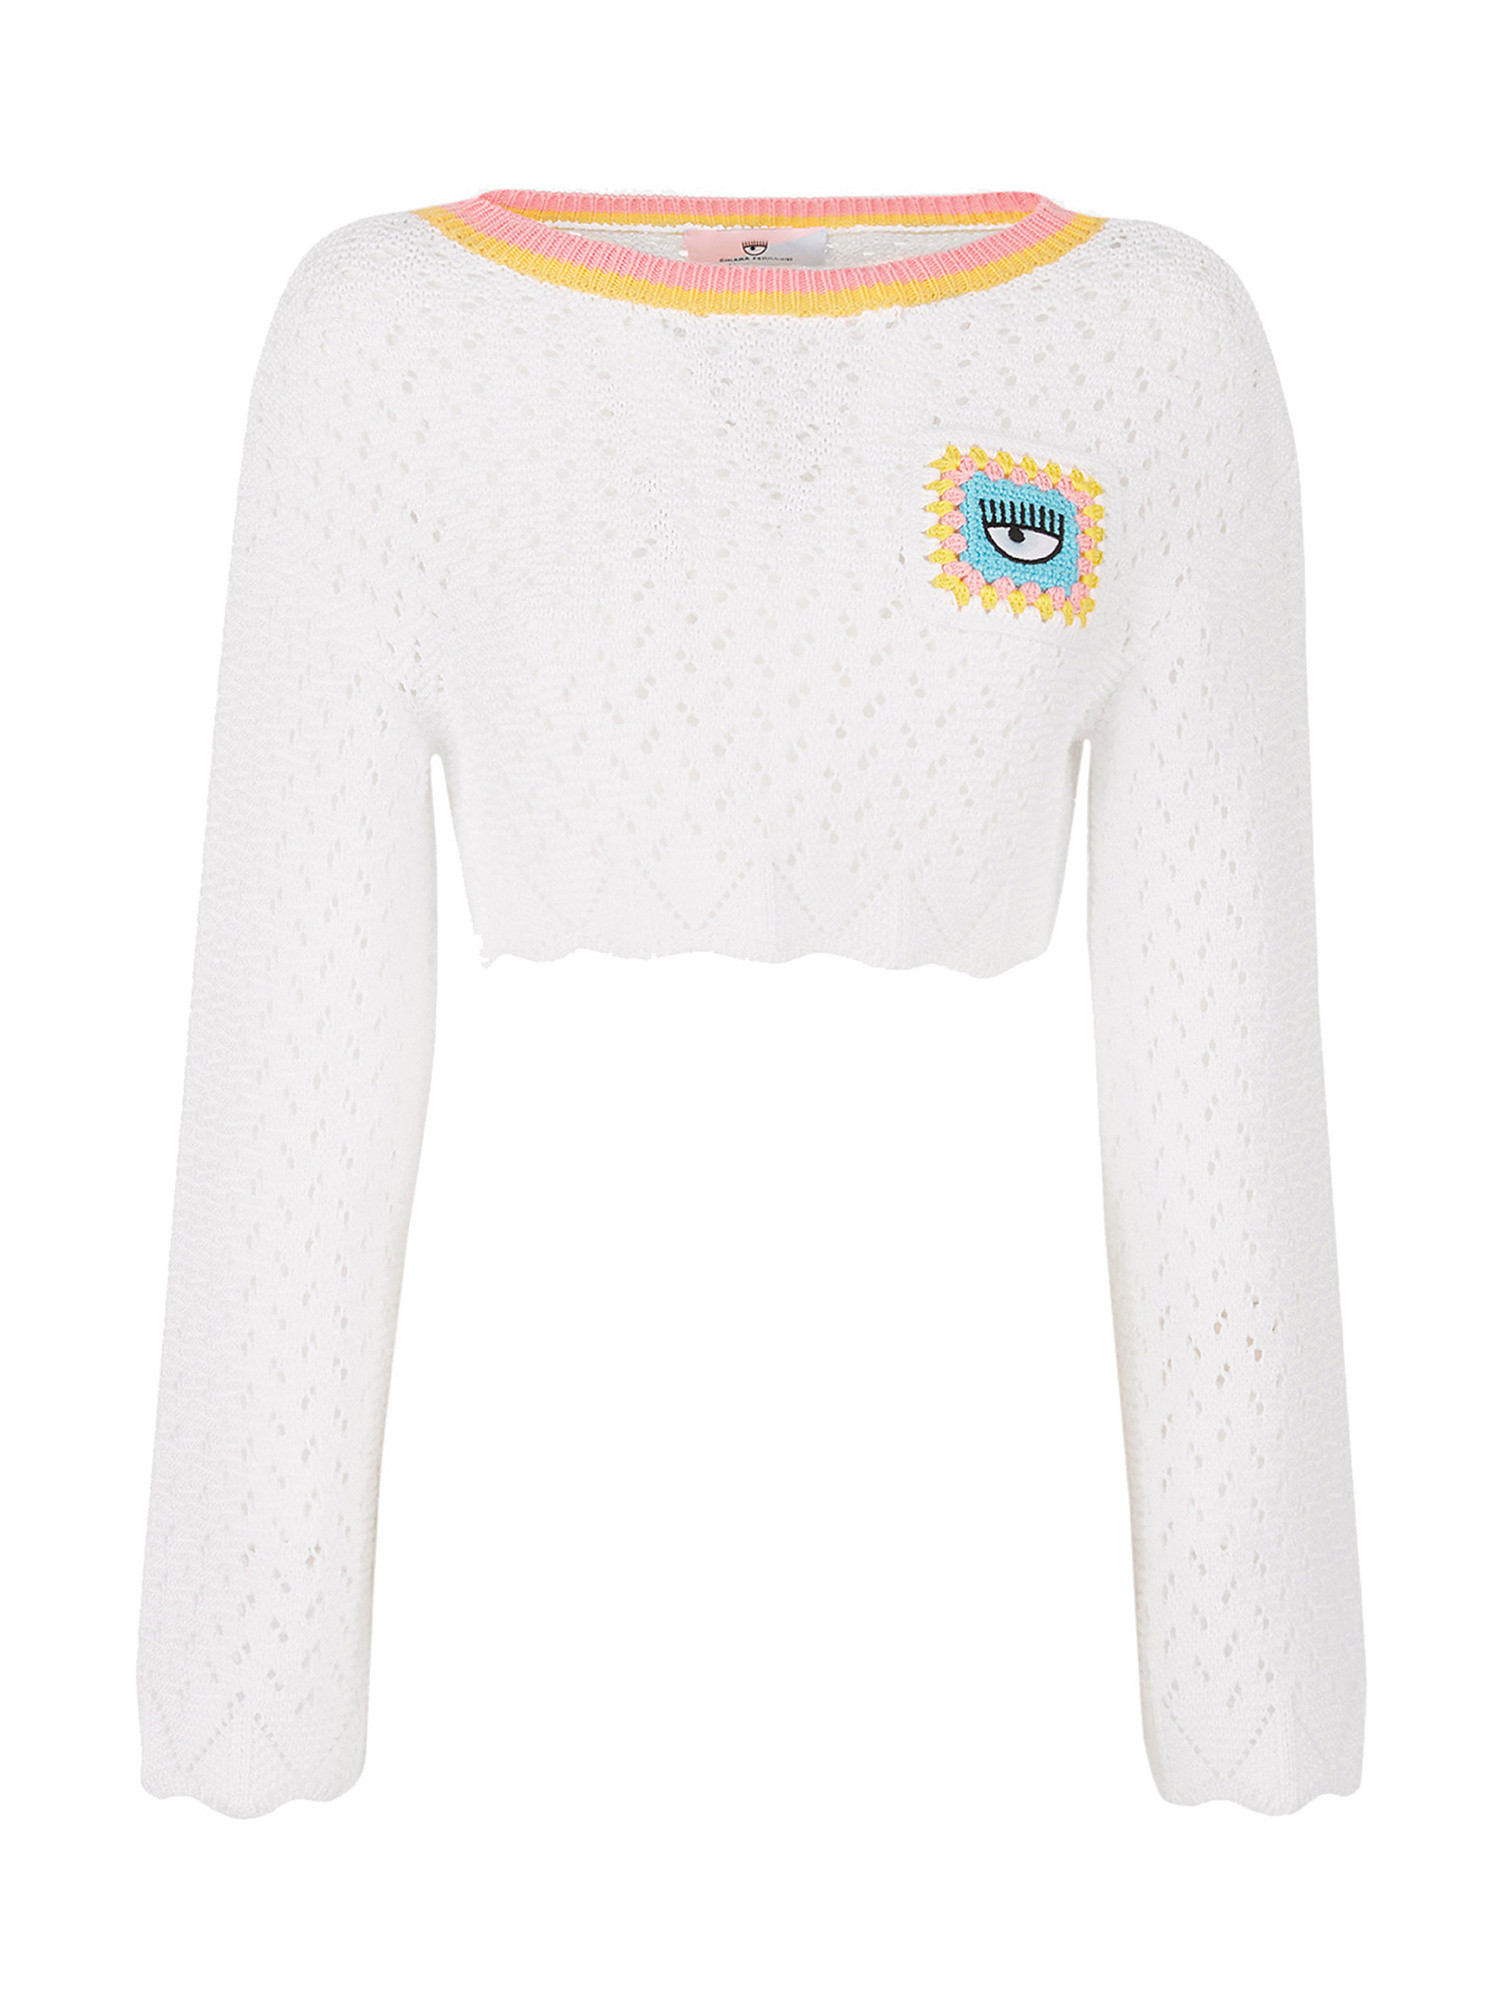 Top crochet con logo, Bianco, large image number 0